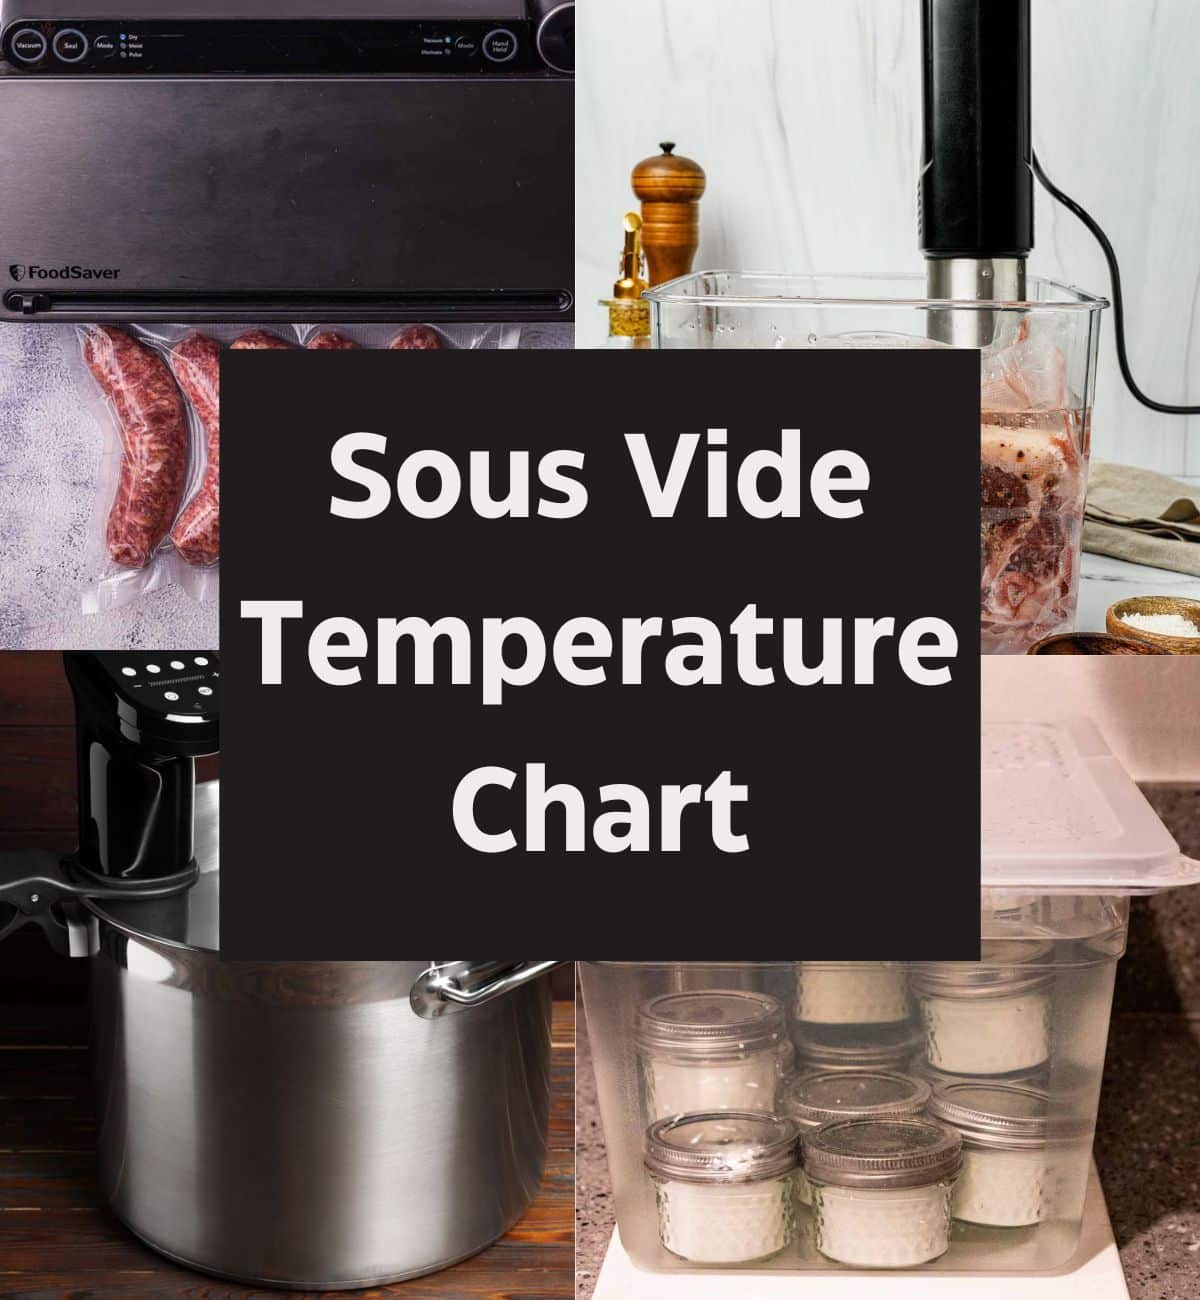 Faster way to heat sousvide water : r/instantpot